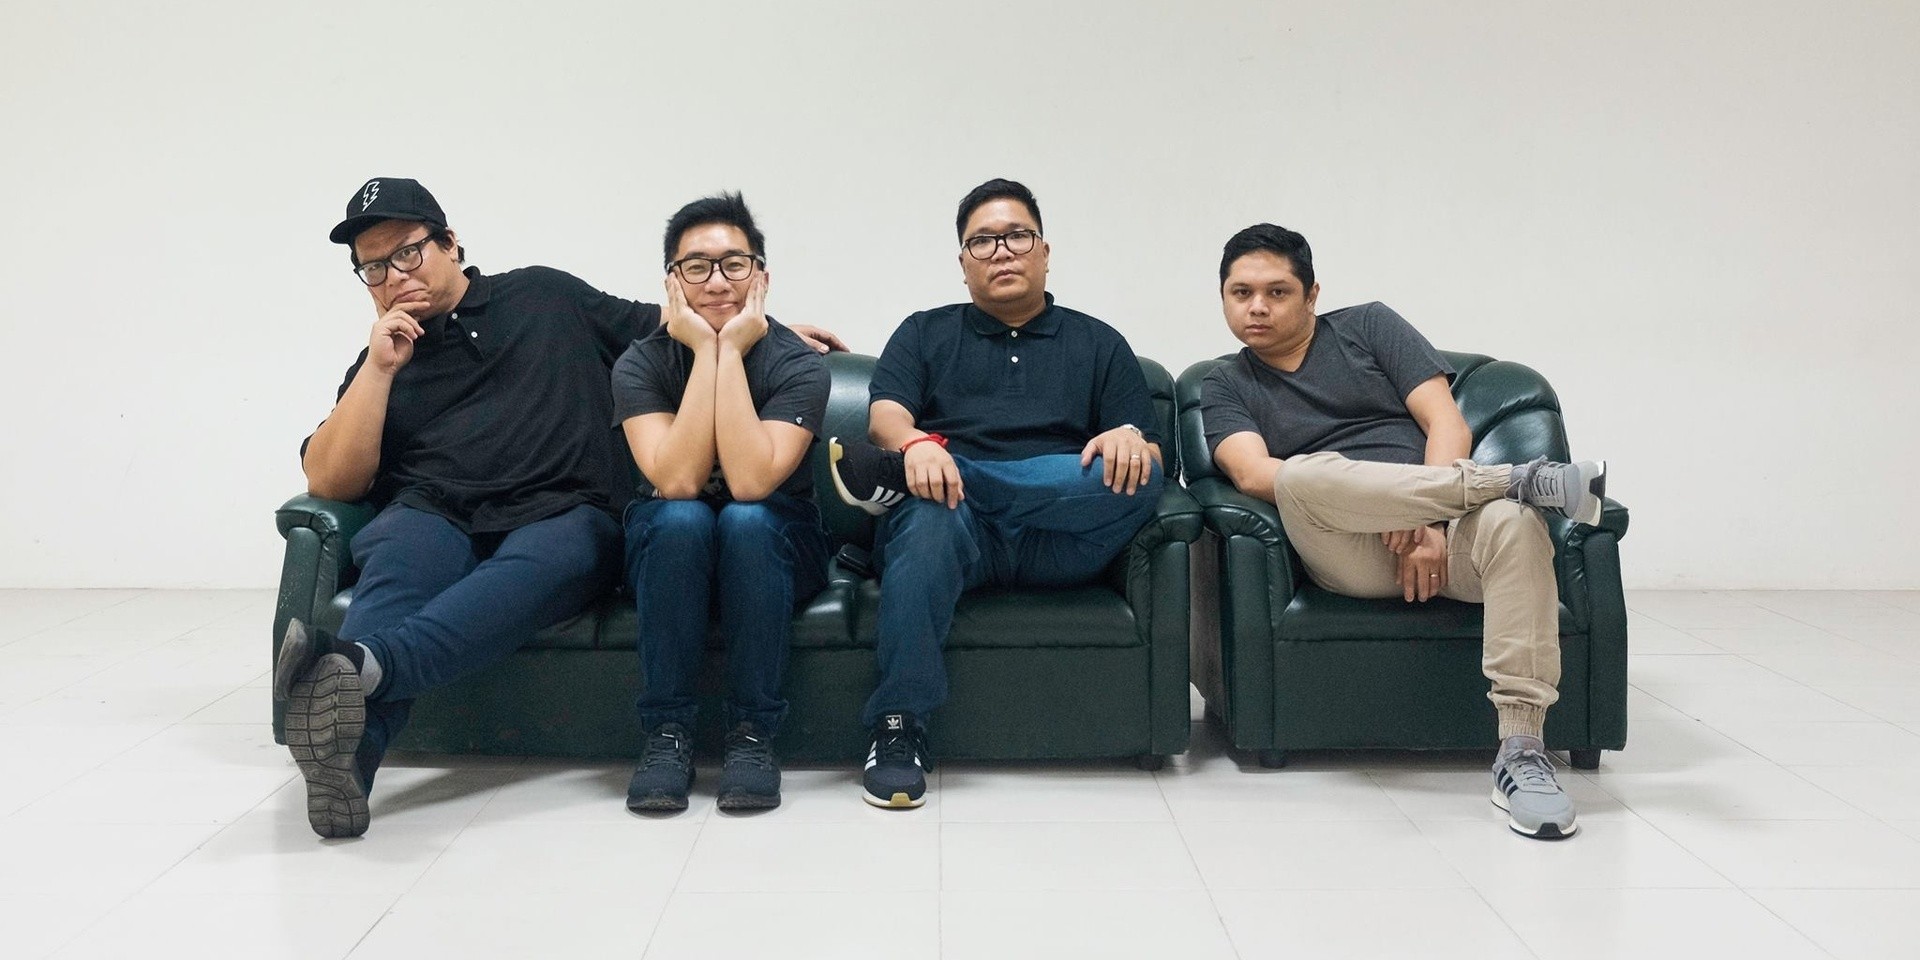 "We’ve been secretly recording songs during quarantine": The Itchyworms on new single 'The Silence' – listen